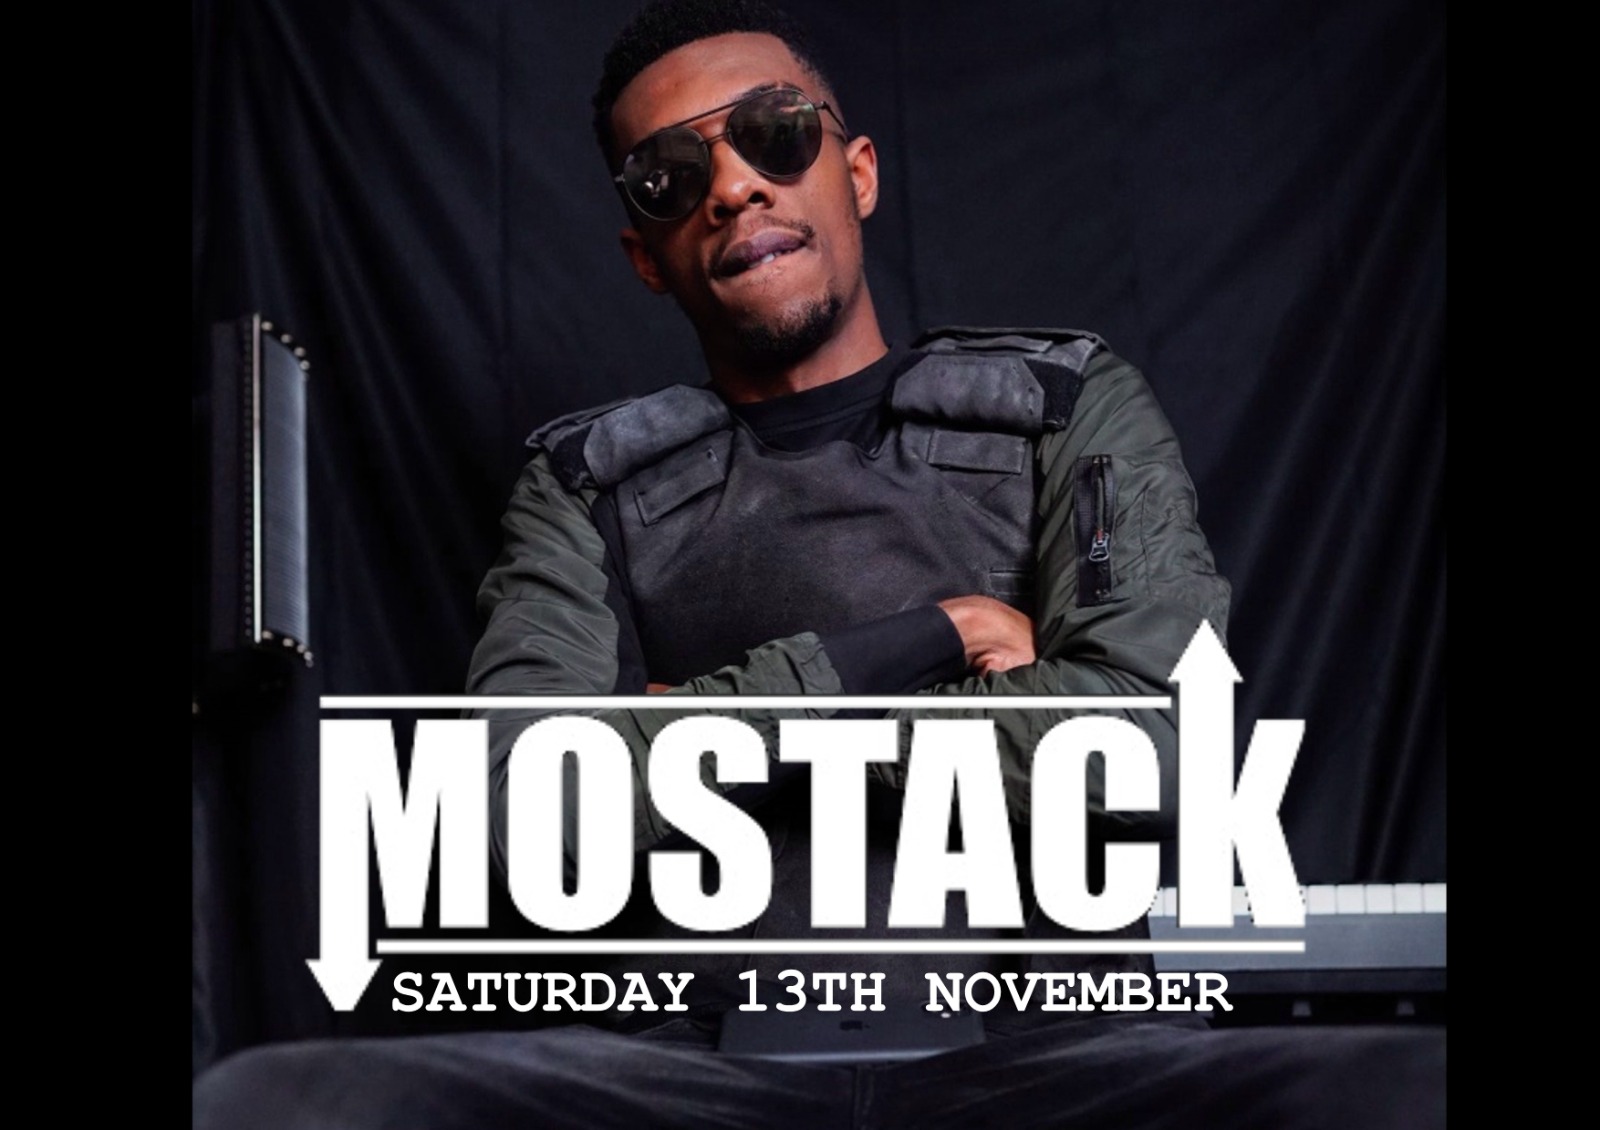 MoStack is all about The Weekend in latest visual